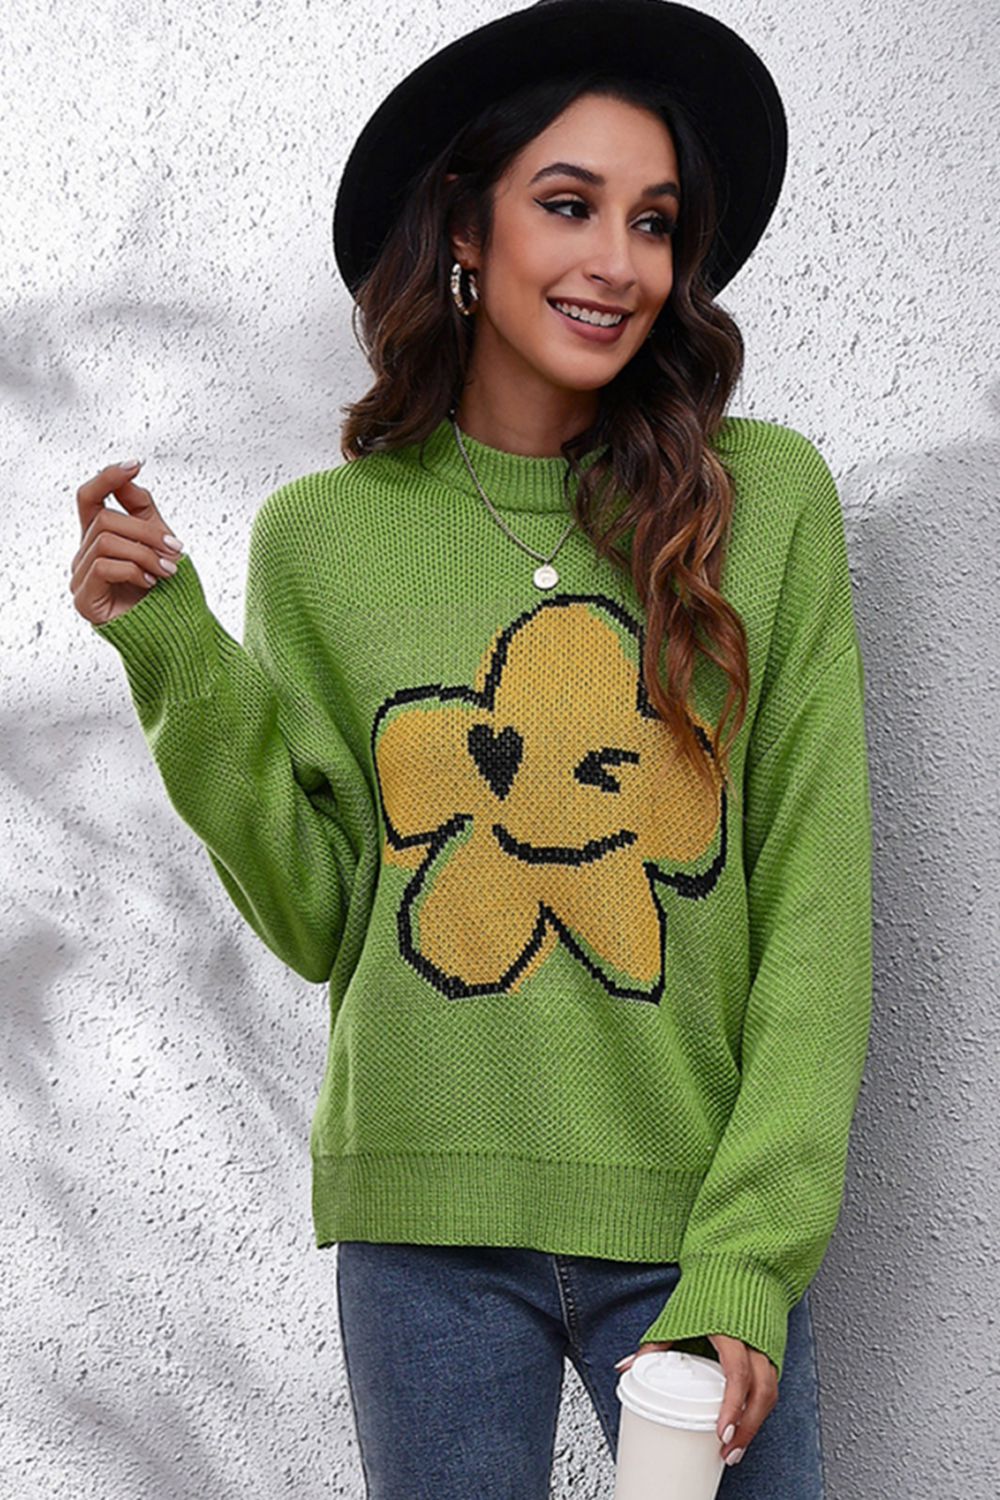 Smiley Face Abstract Flower Bold Color Knit Pullover Long Sleeve Sweater Shirt